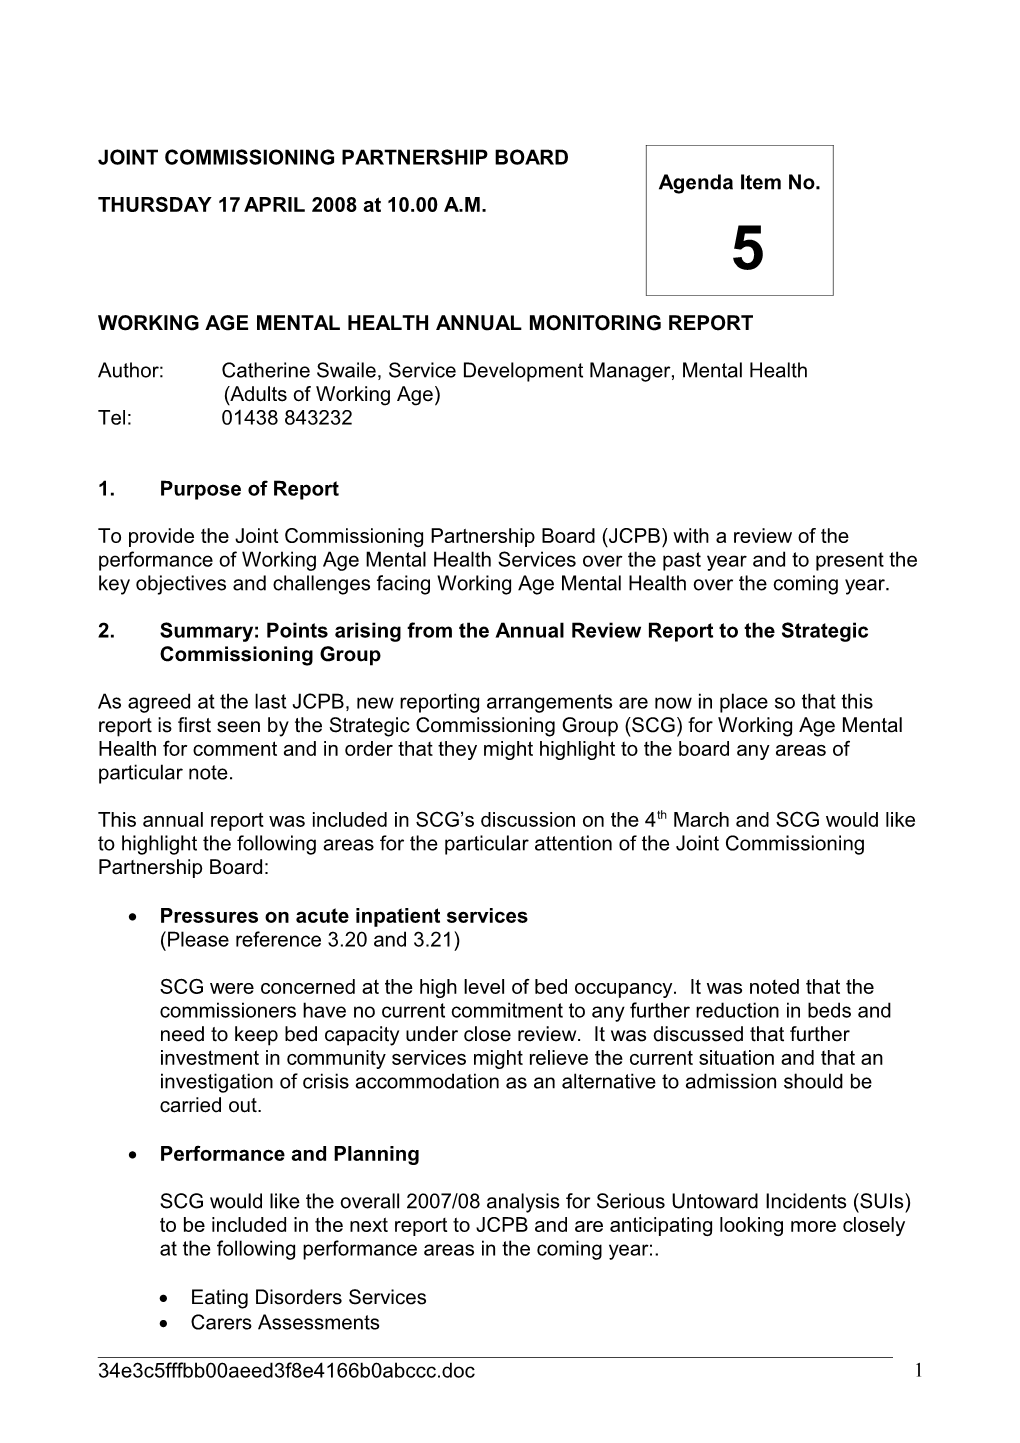 Working Age Mental Health Annual Monitoring Report